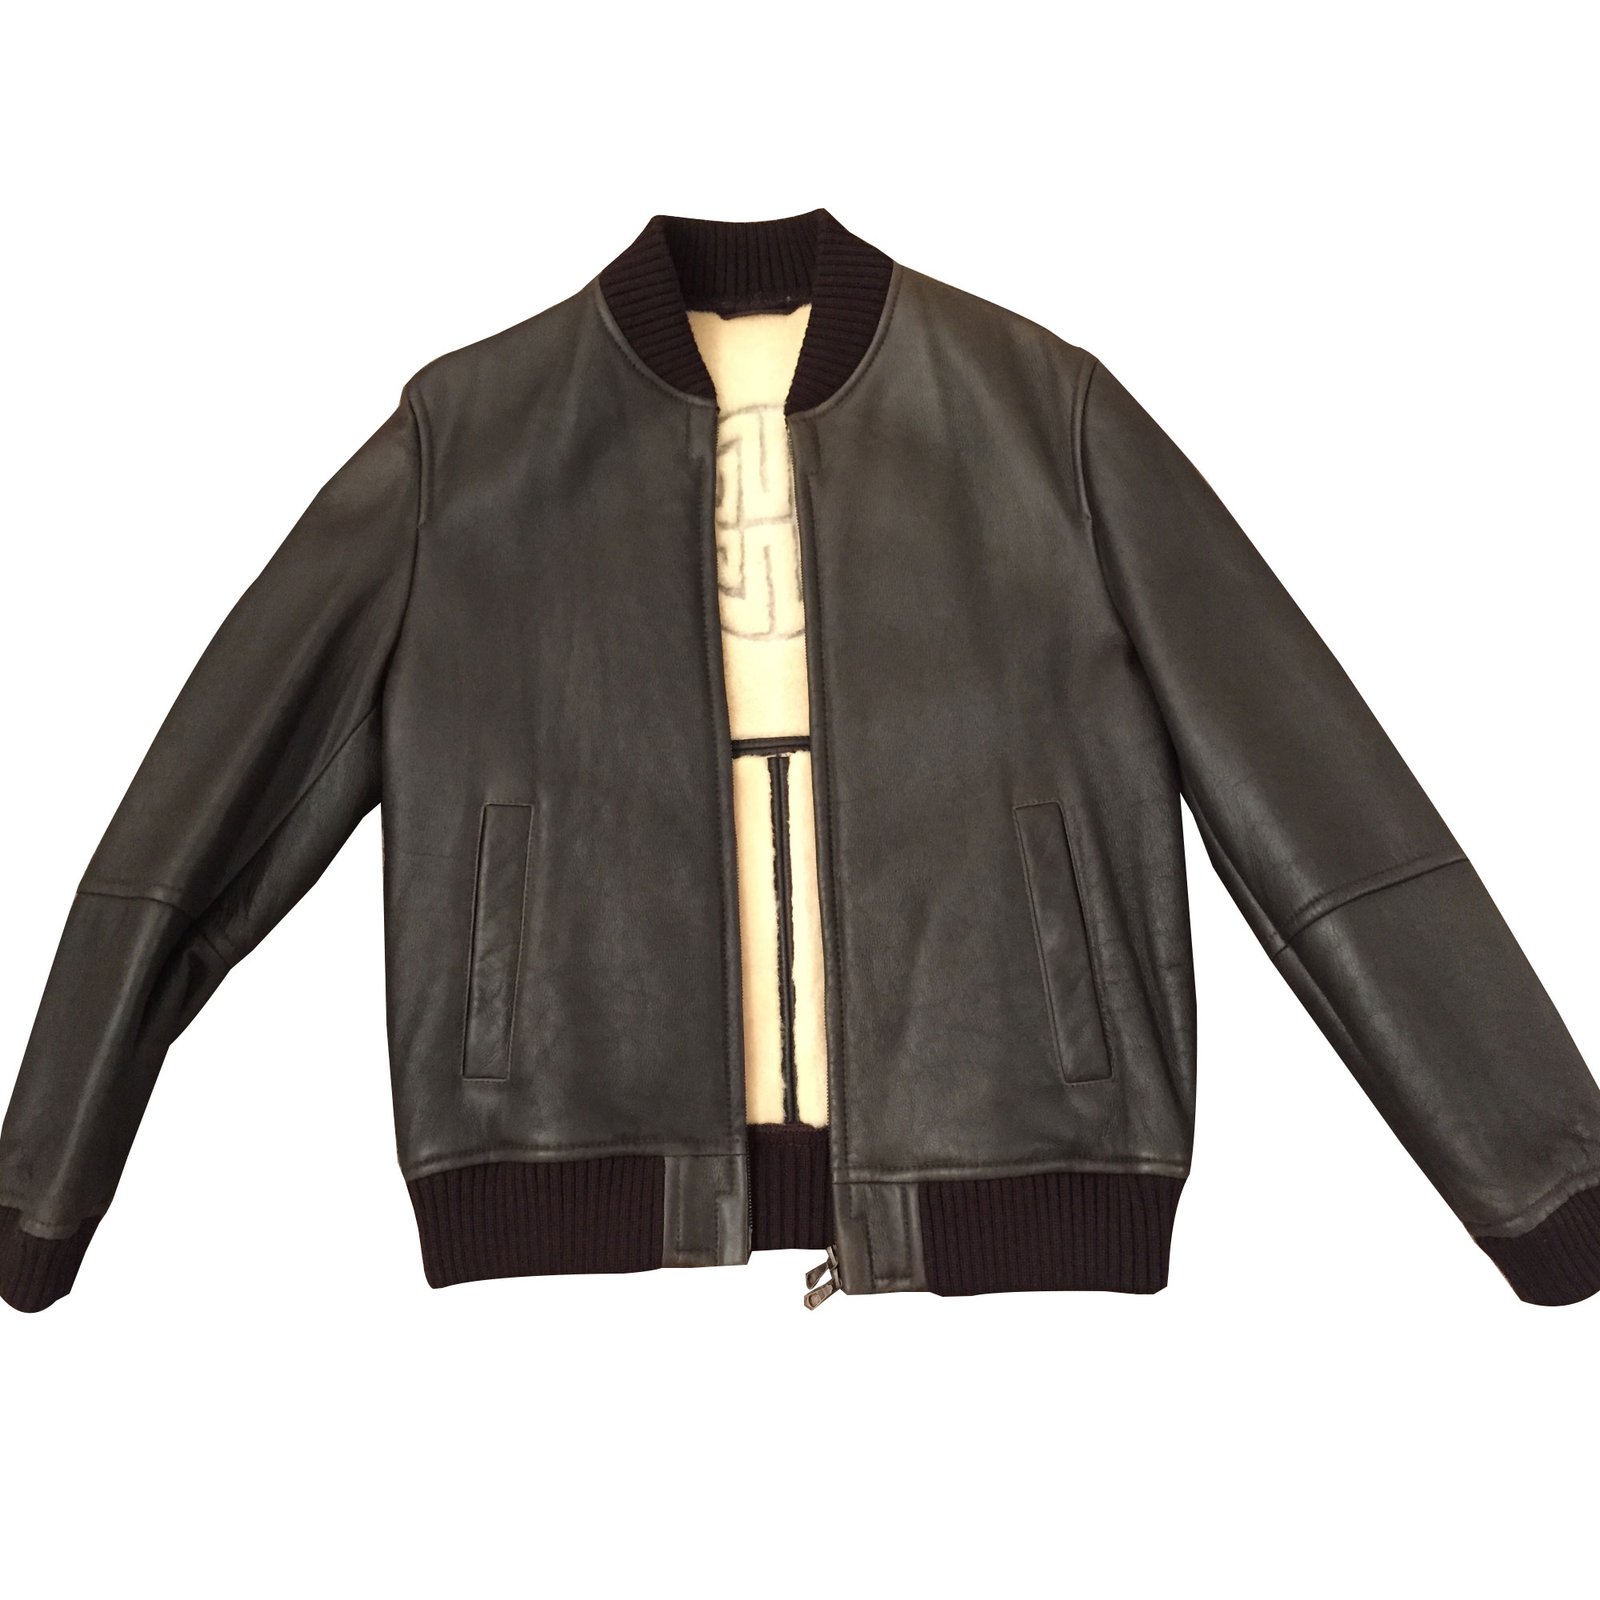 mens boss leather jacket